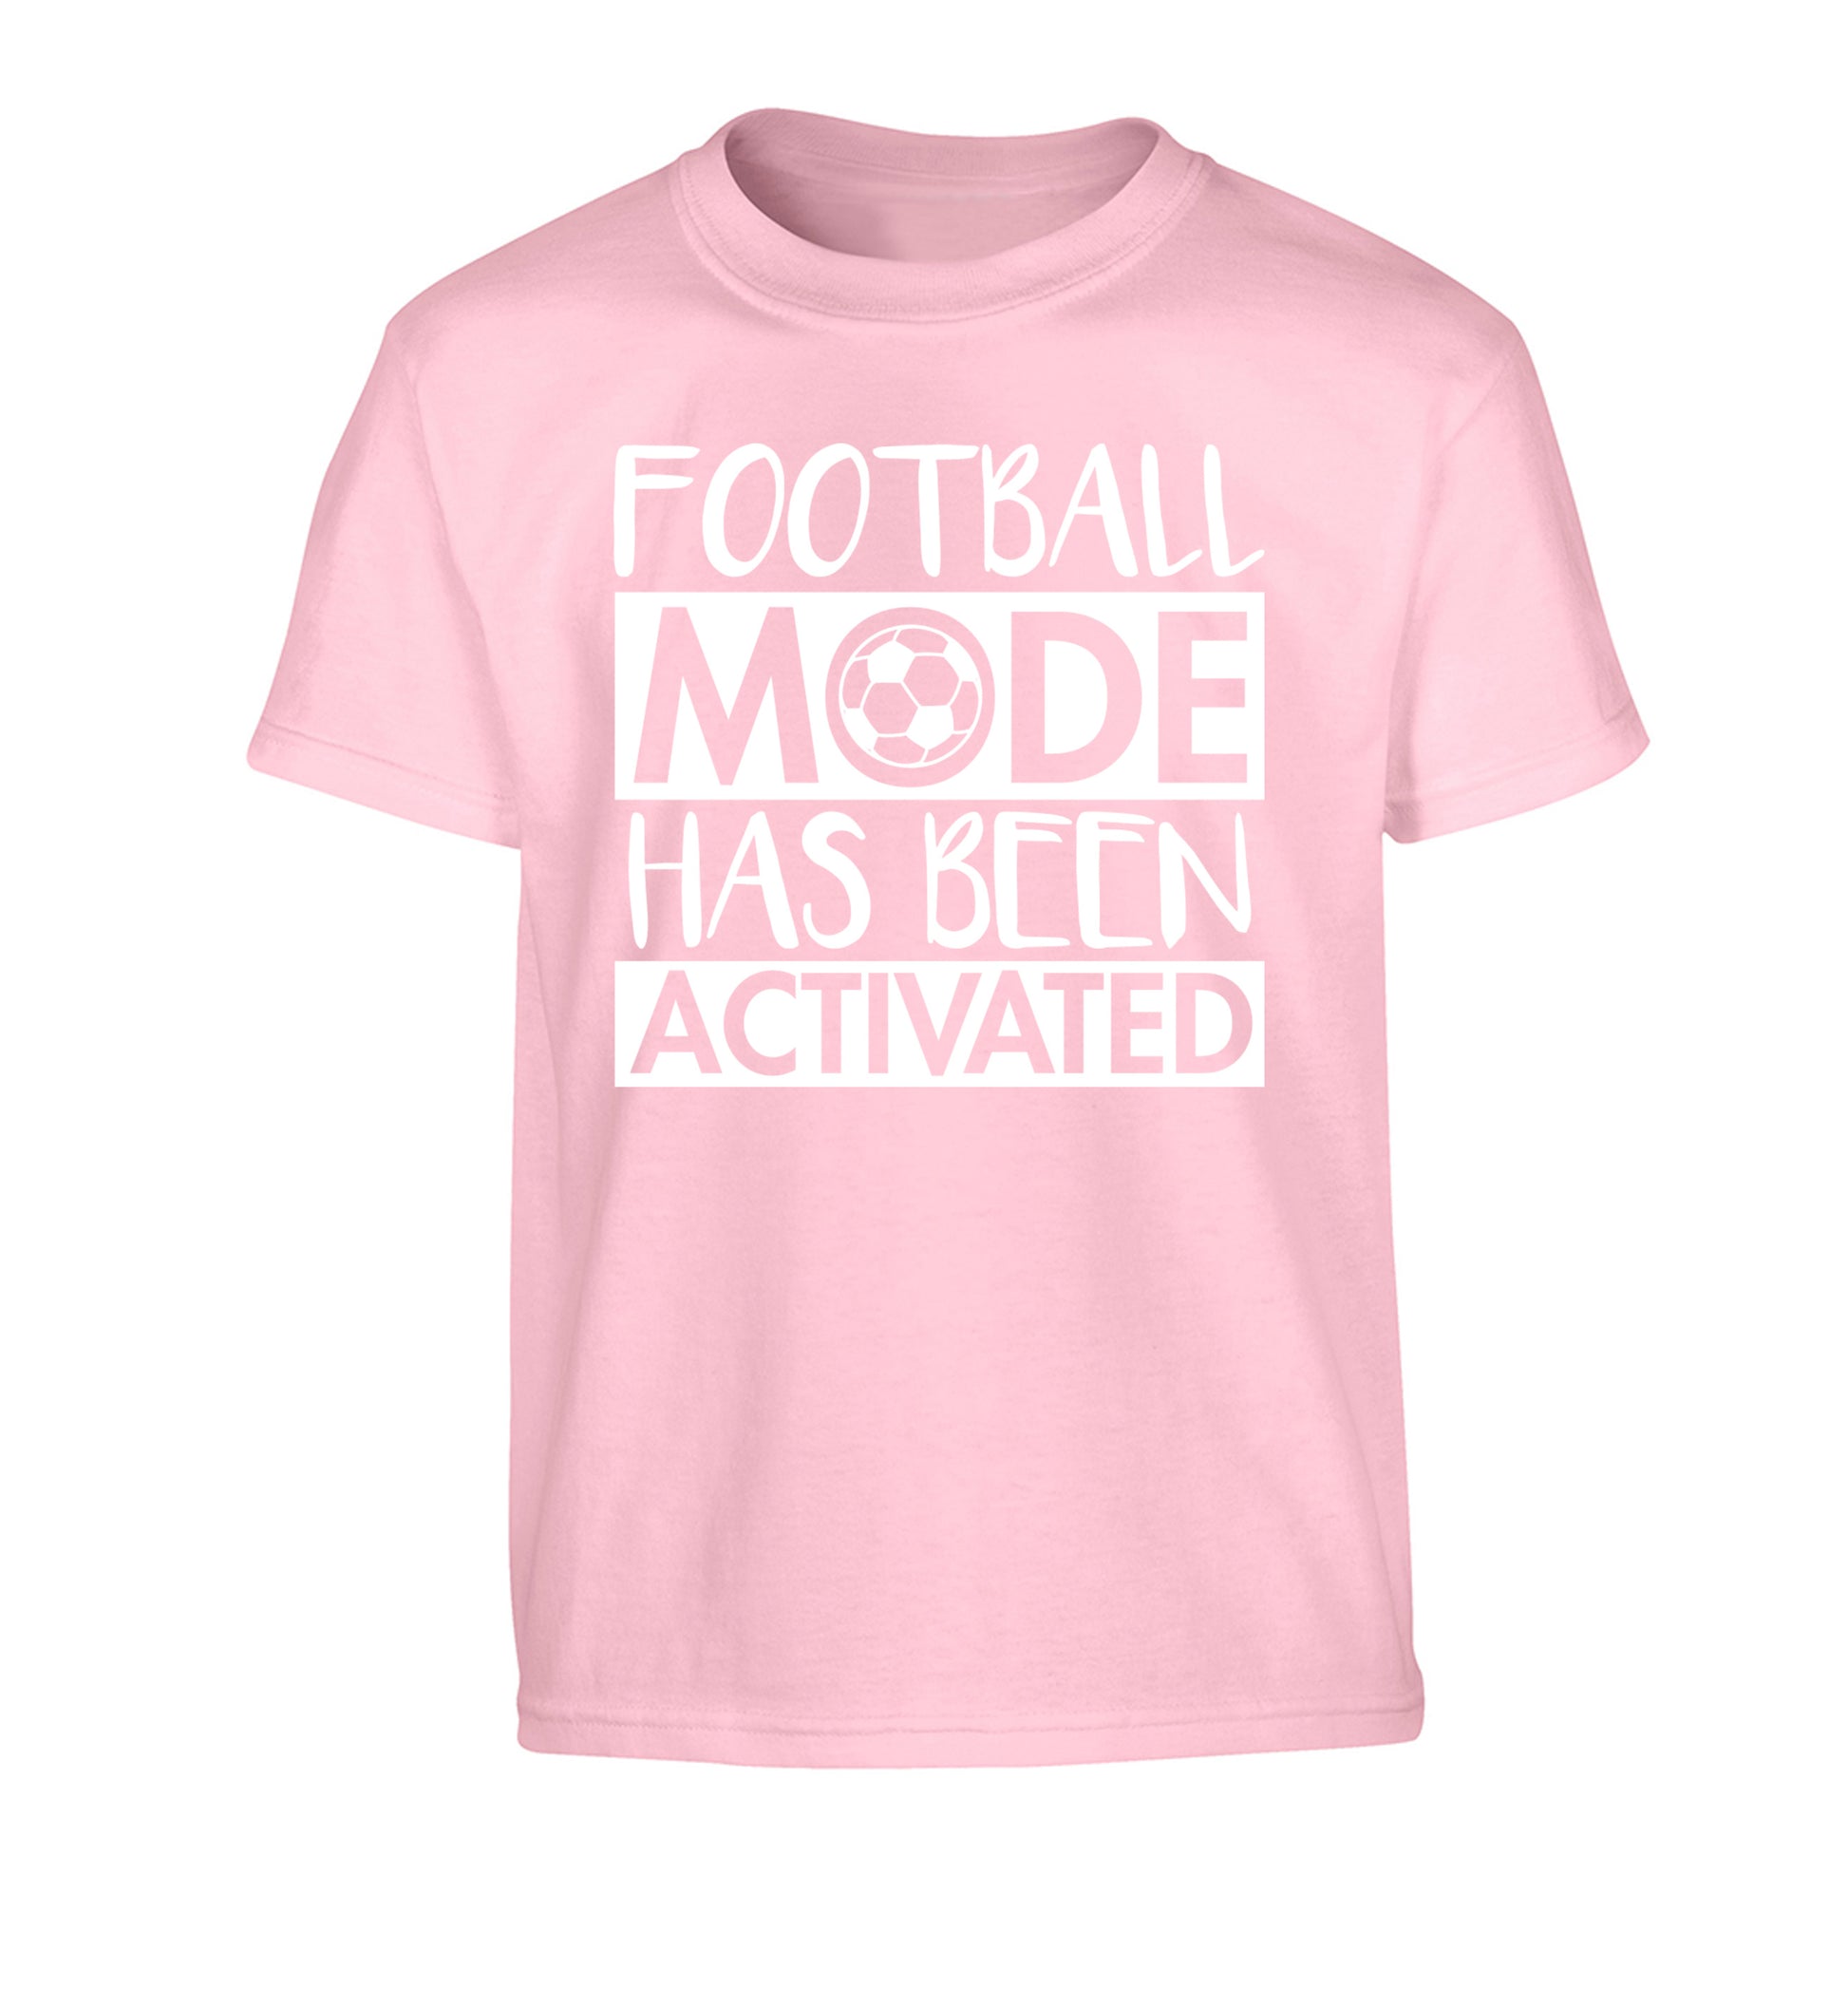 Football mode has been activated Children's light pink Tshirt 12-14 Years